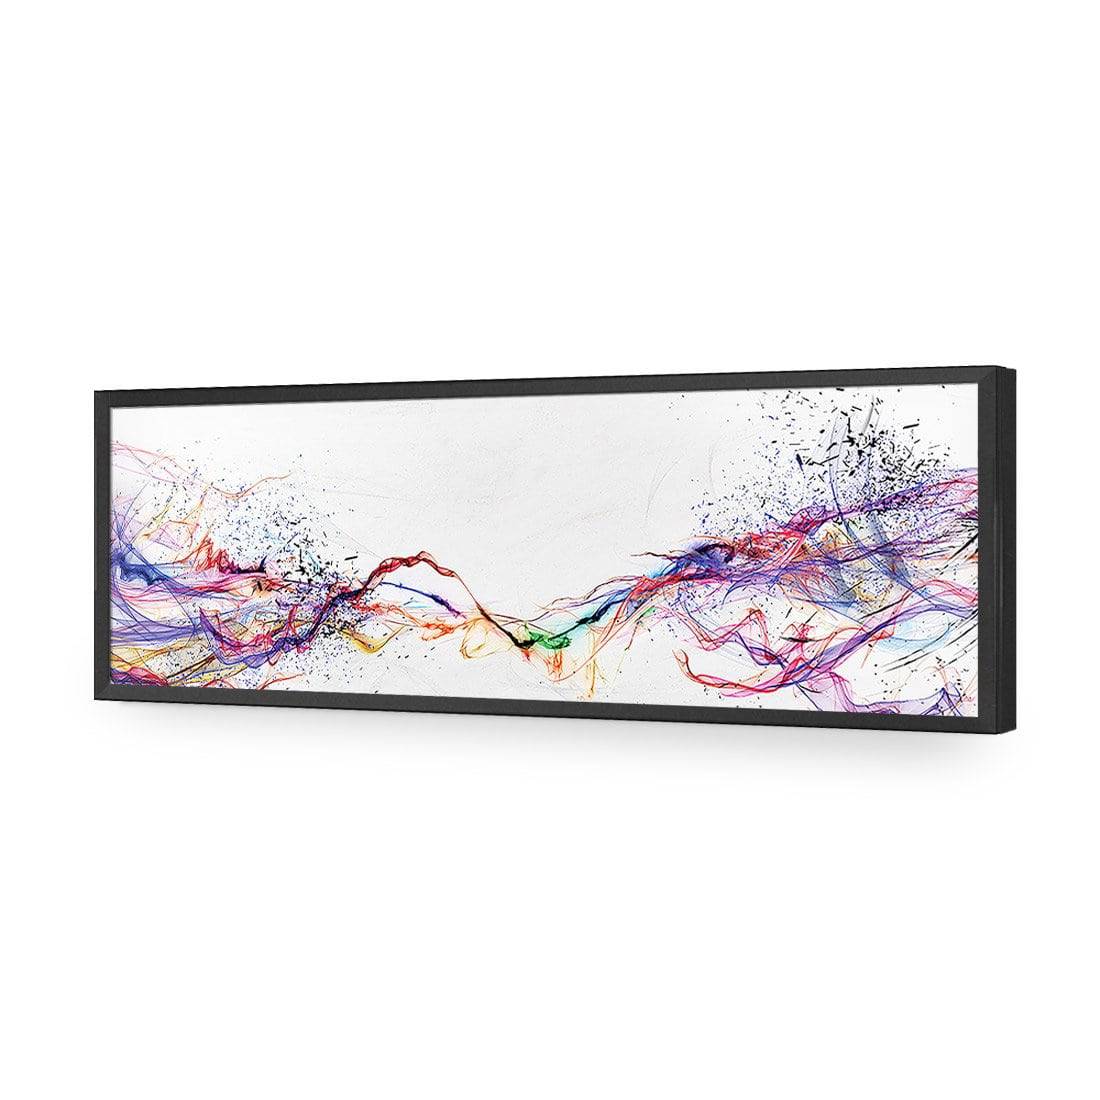 Electricity On Black, Inverted, Long-Acrylic-Wall Art Design-Without Border-Acrylic - Black Frame-60x20cm-Wall Art Designs